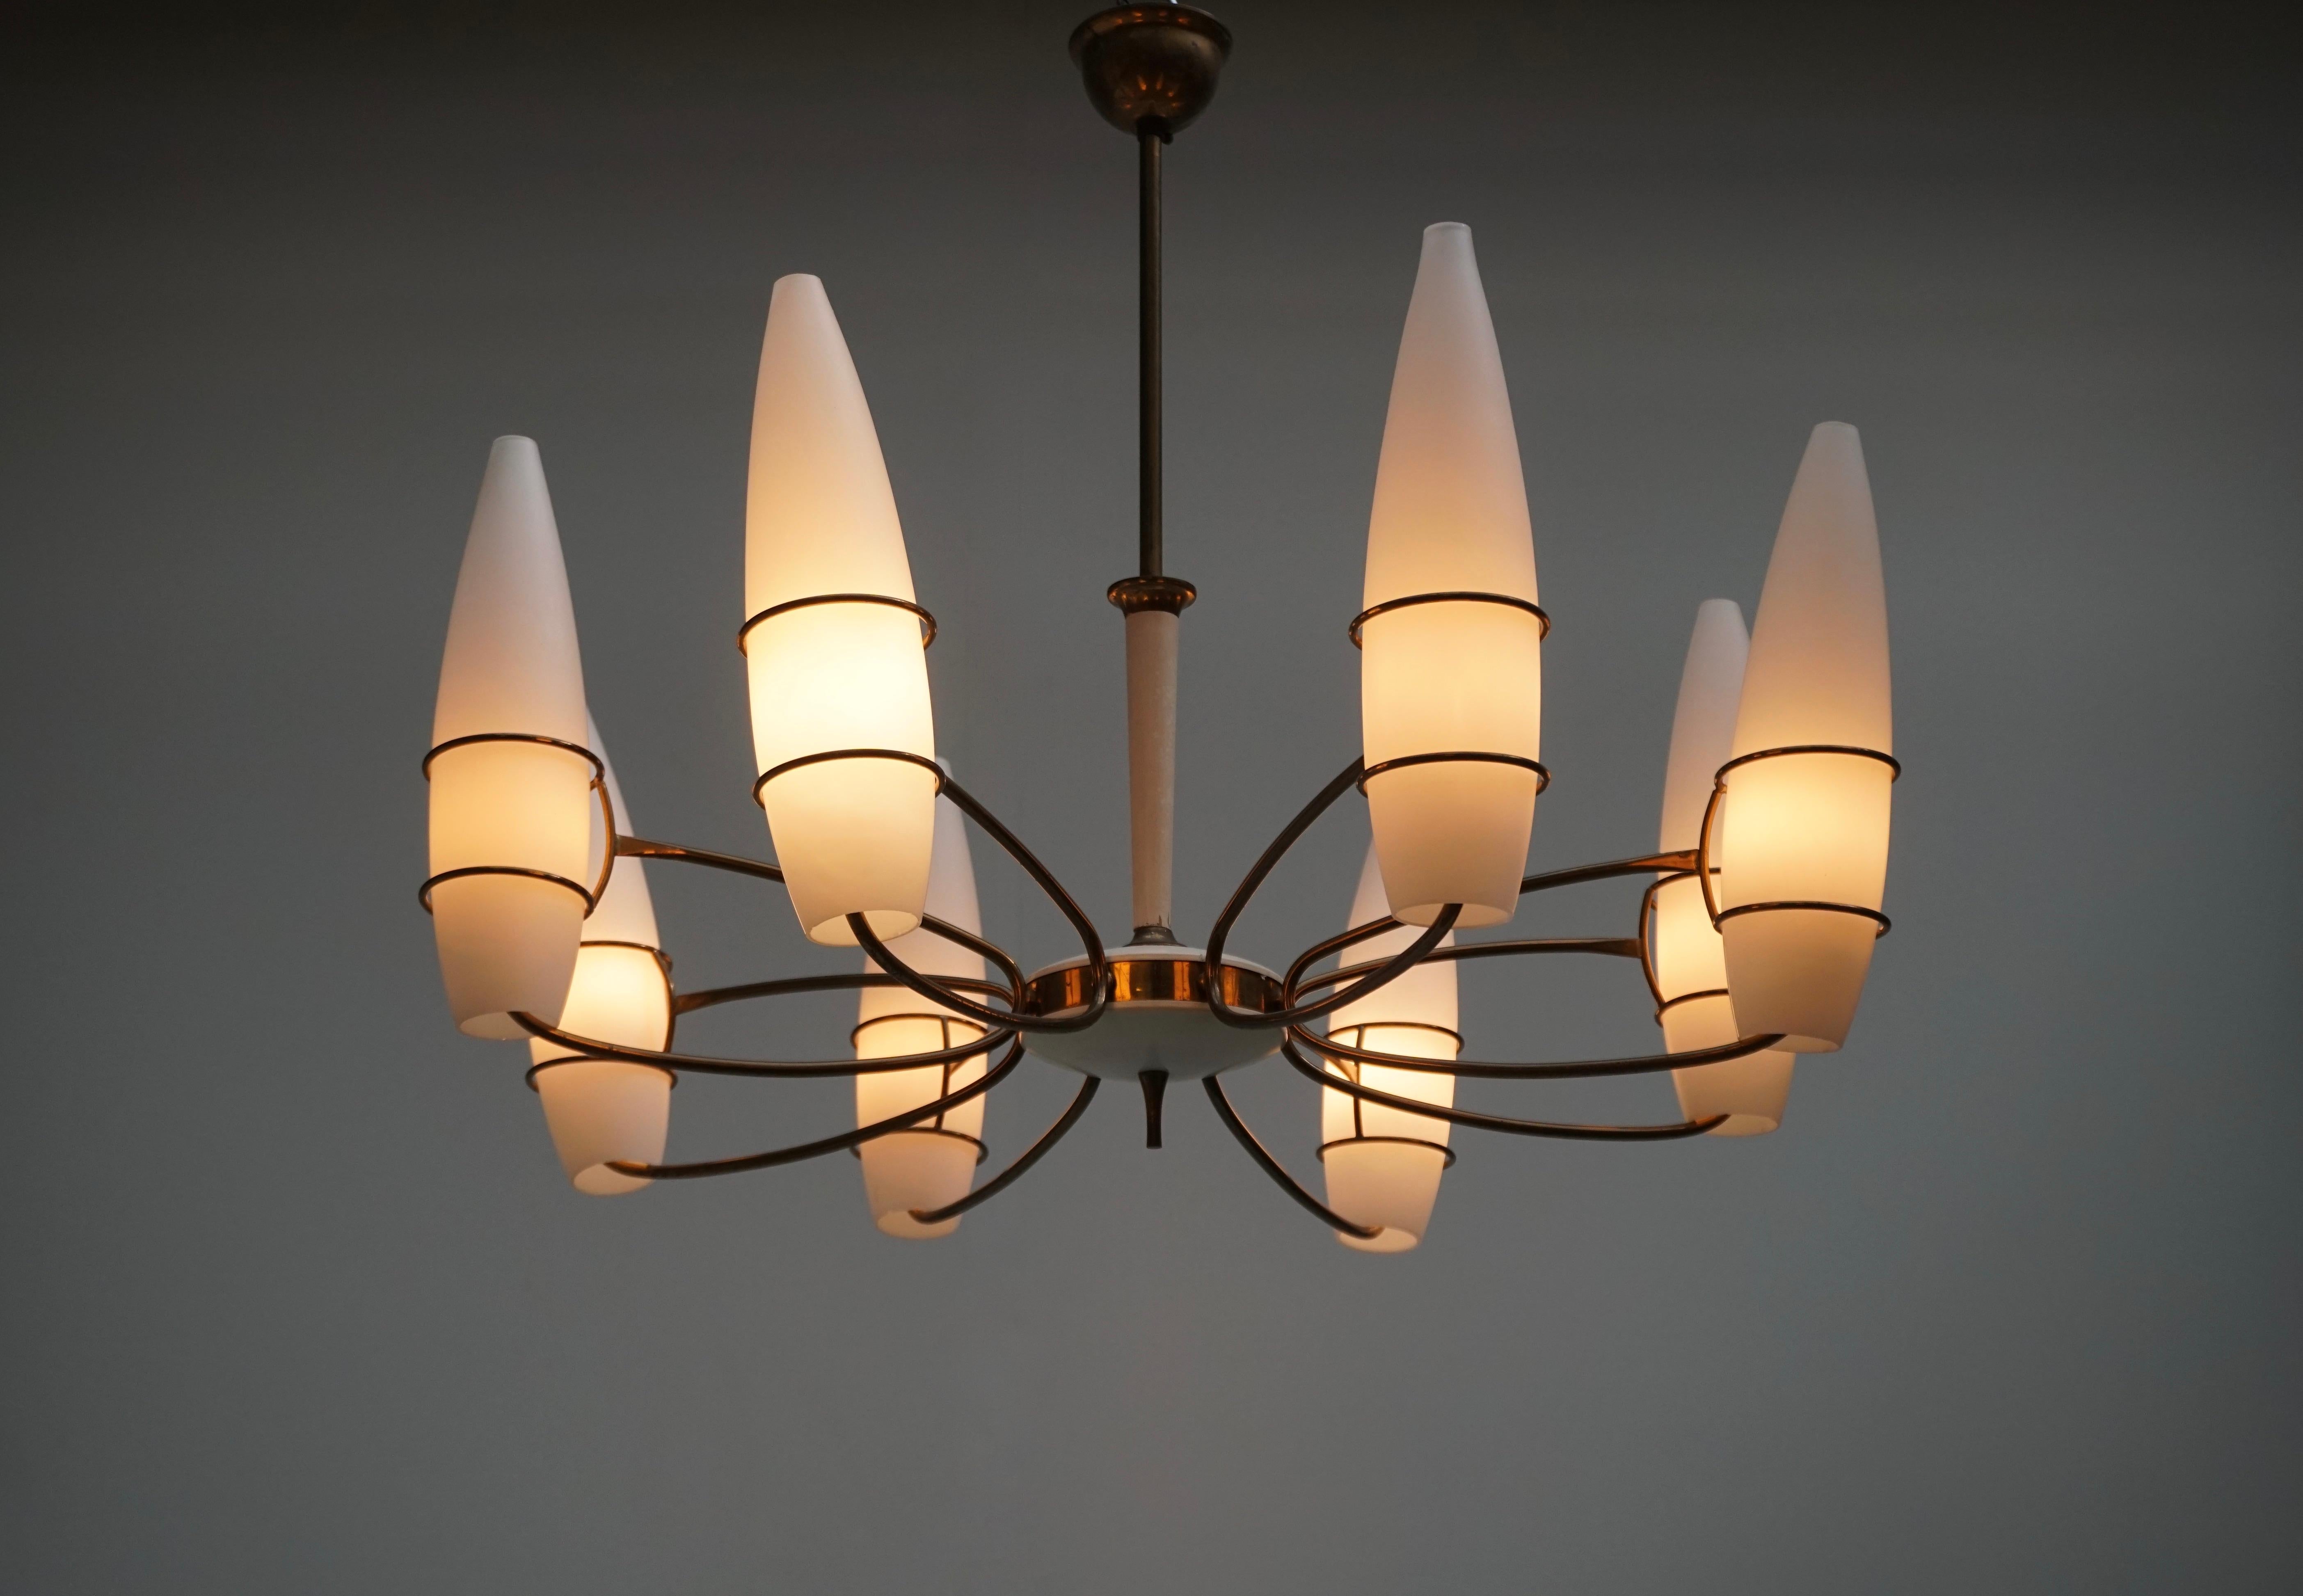 Elegant large 1950s Italian chandelier in brass,wood and opaline glass.
The light requires eight single E14 screw fit lightbulbs (40Watt max.) LED compatible.
